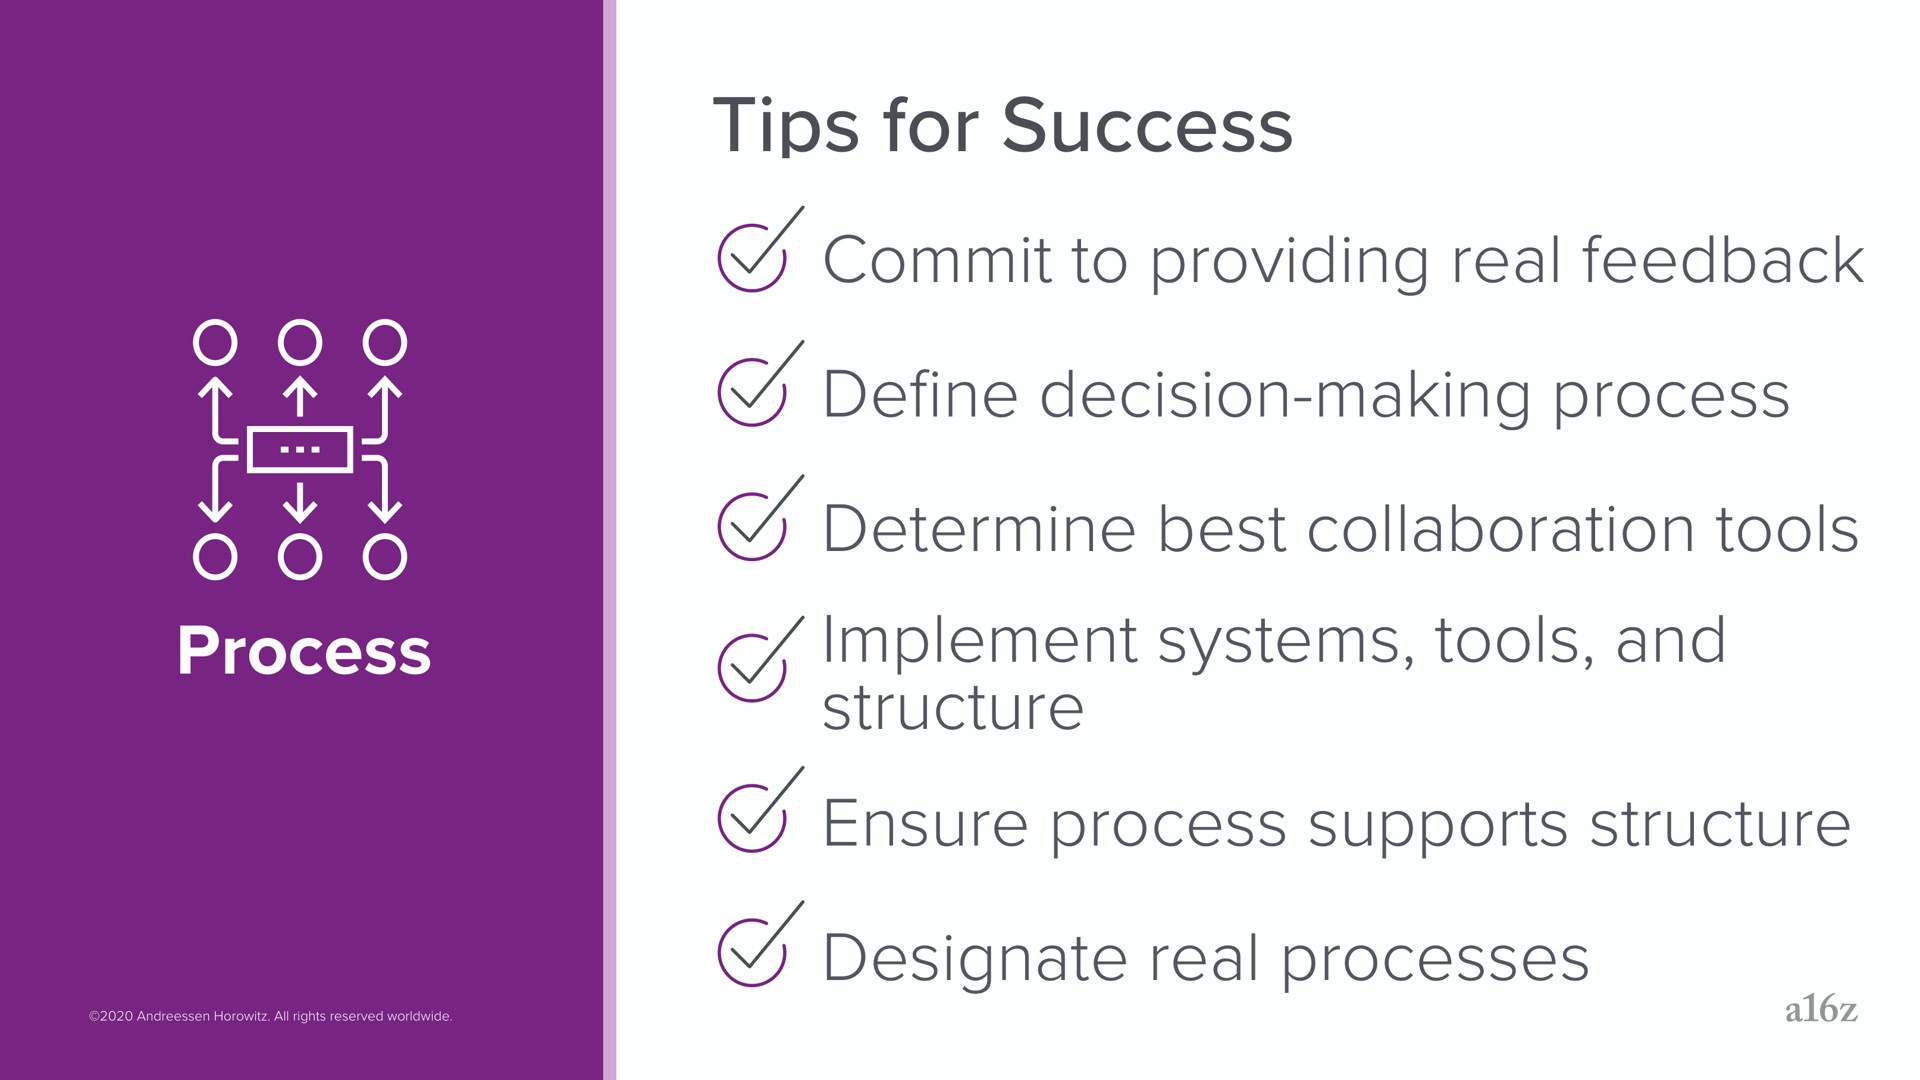 tips for success designate real processes | a16z